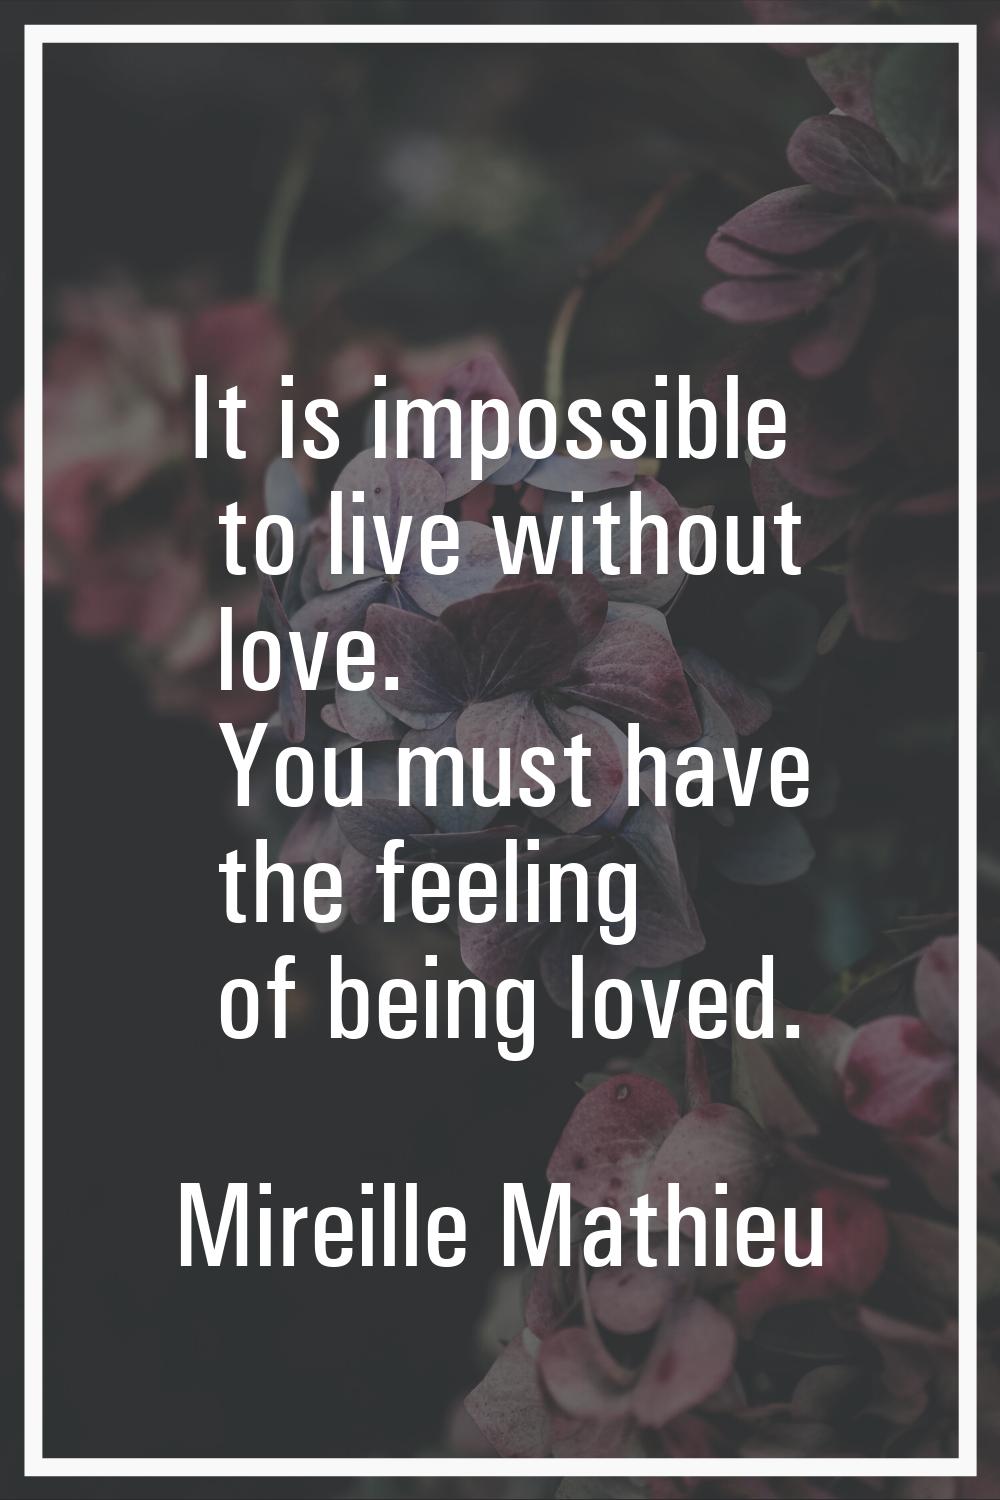 It is impossible to live without love. You must have the feeling of being loved.